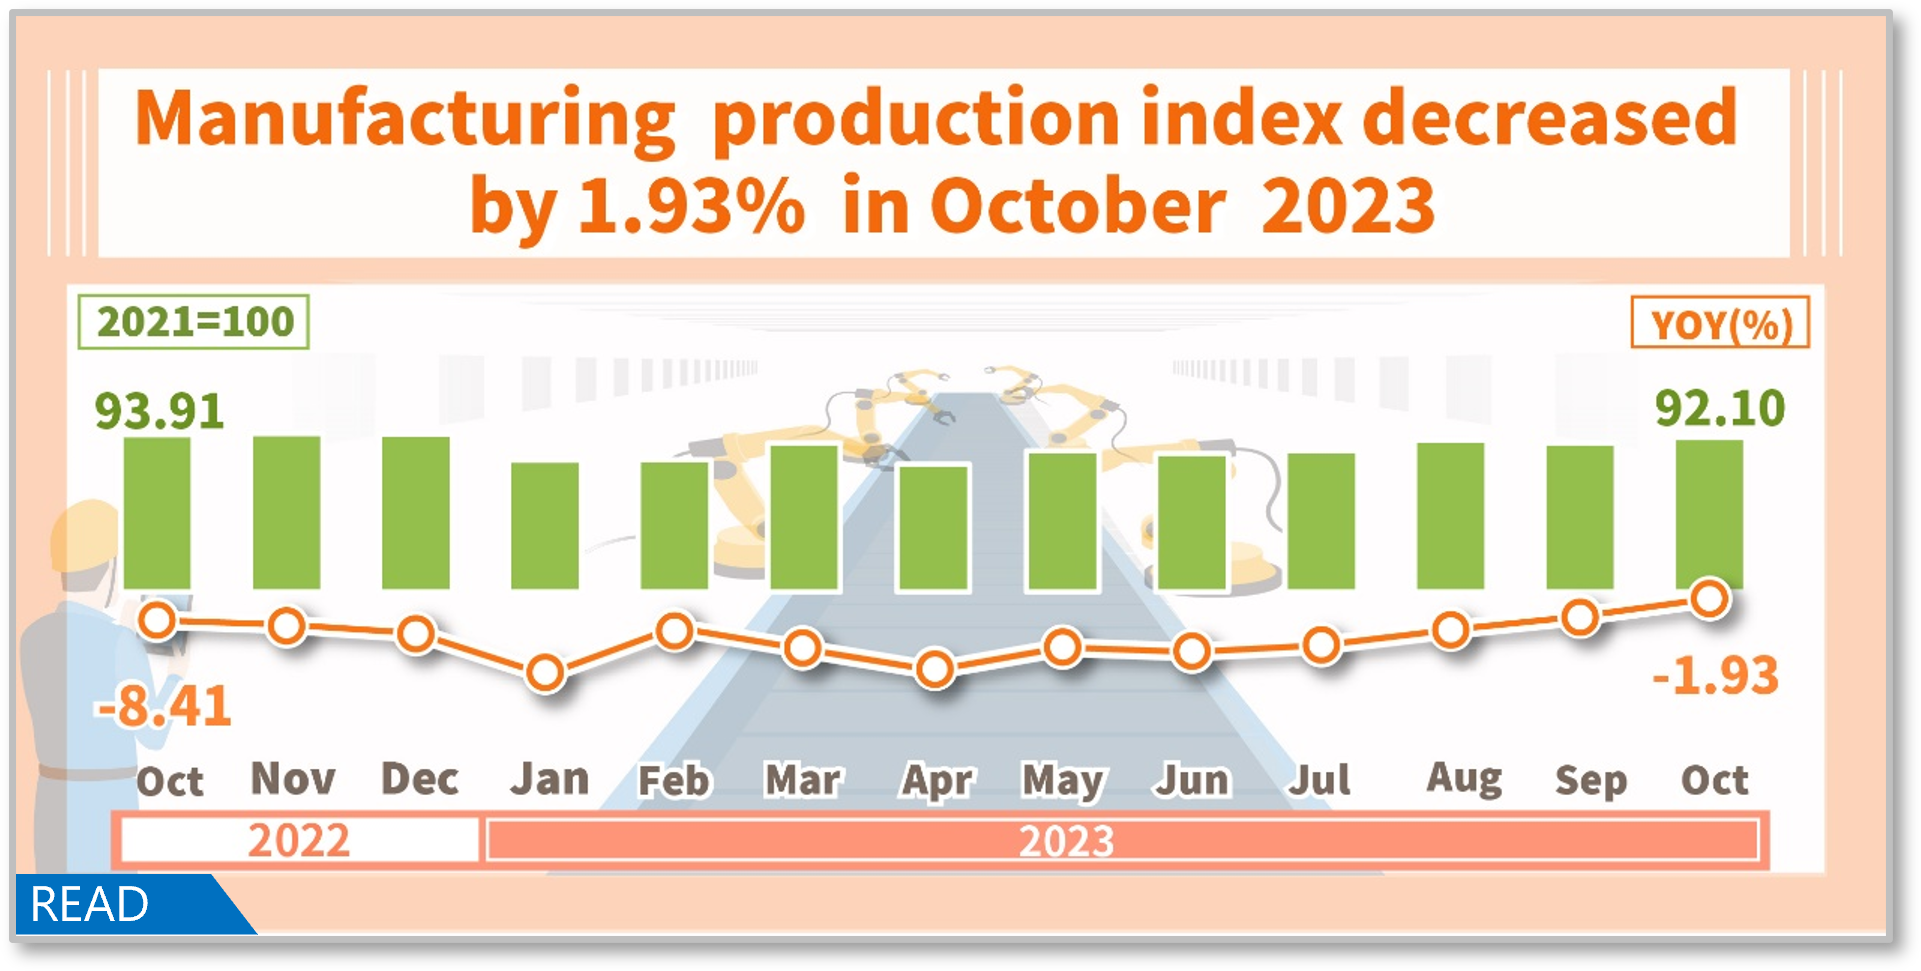 Manufacturing Production Index in October 2023